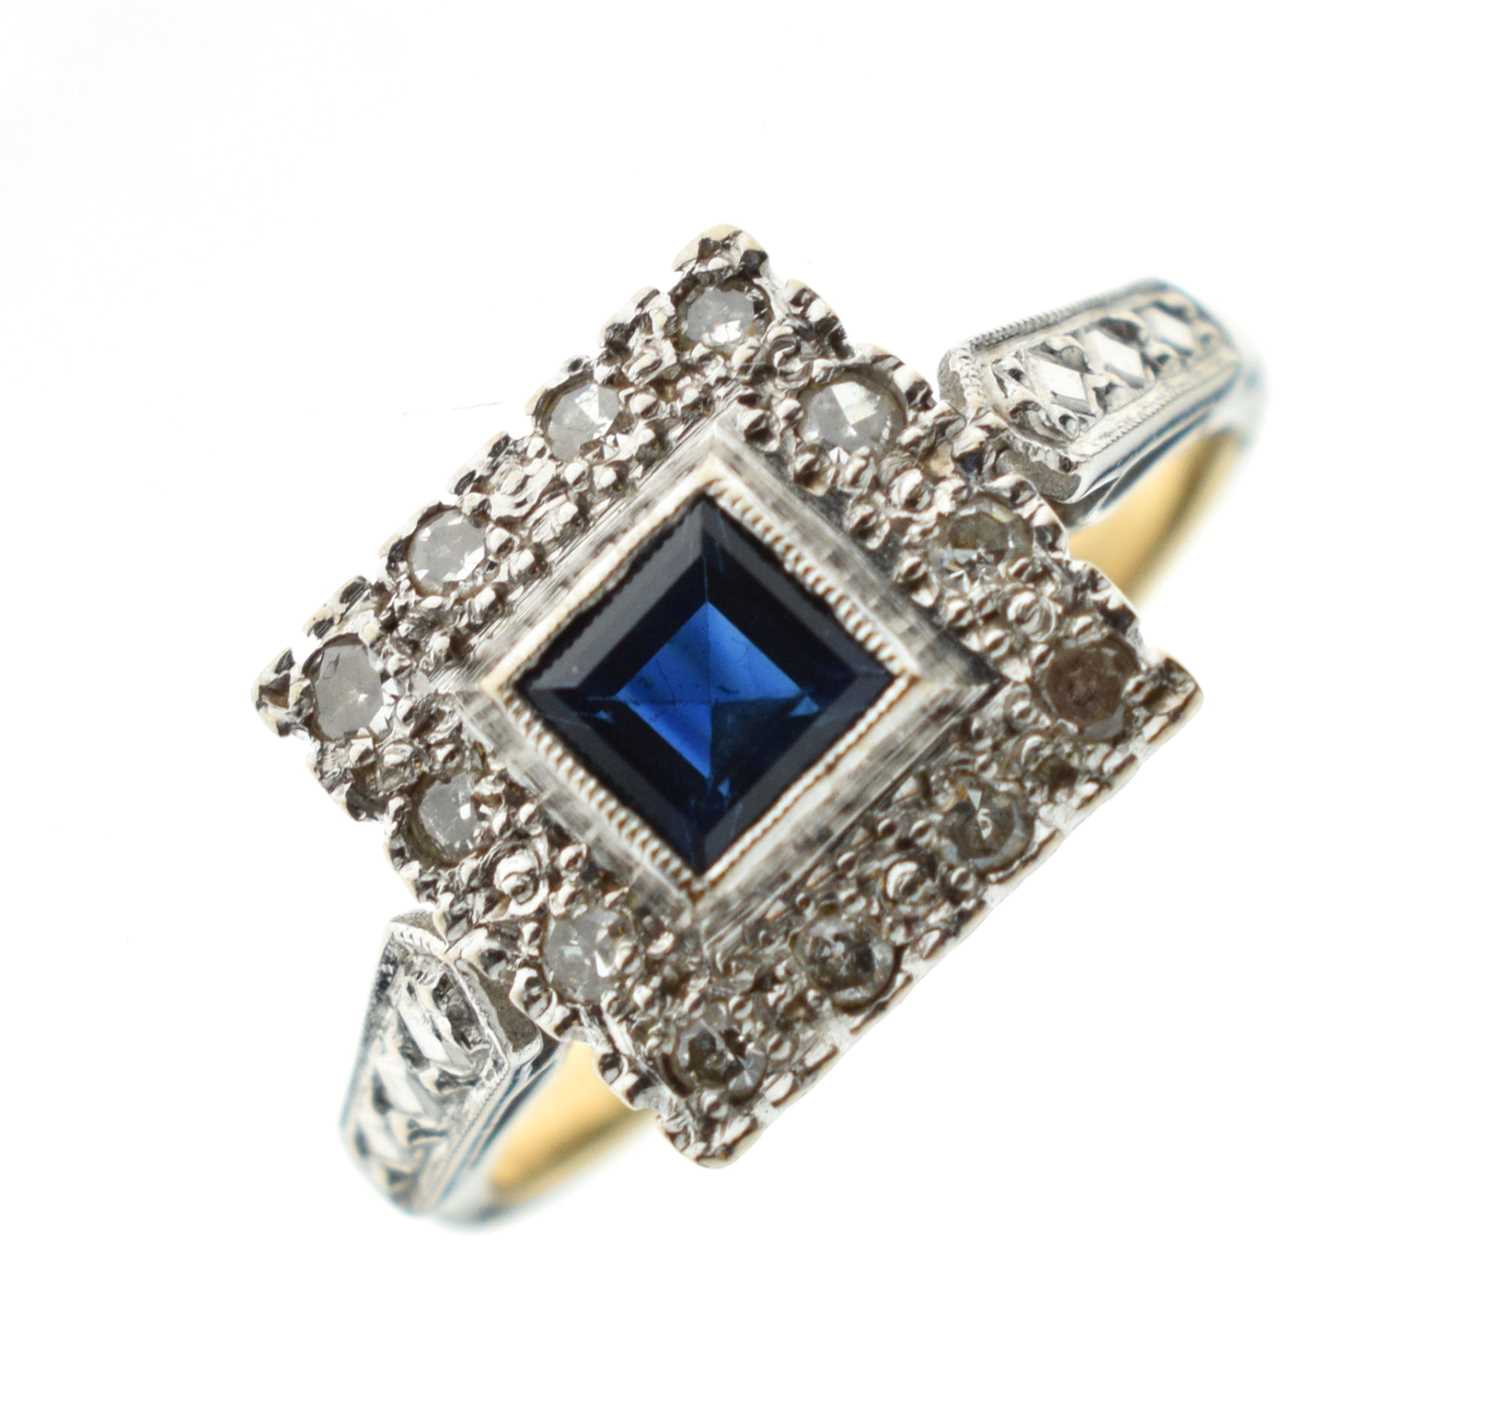 Sapphire and diamond 18ct yellow and white gold ring